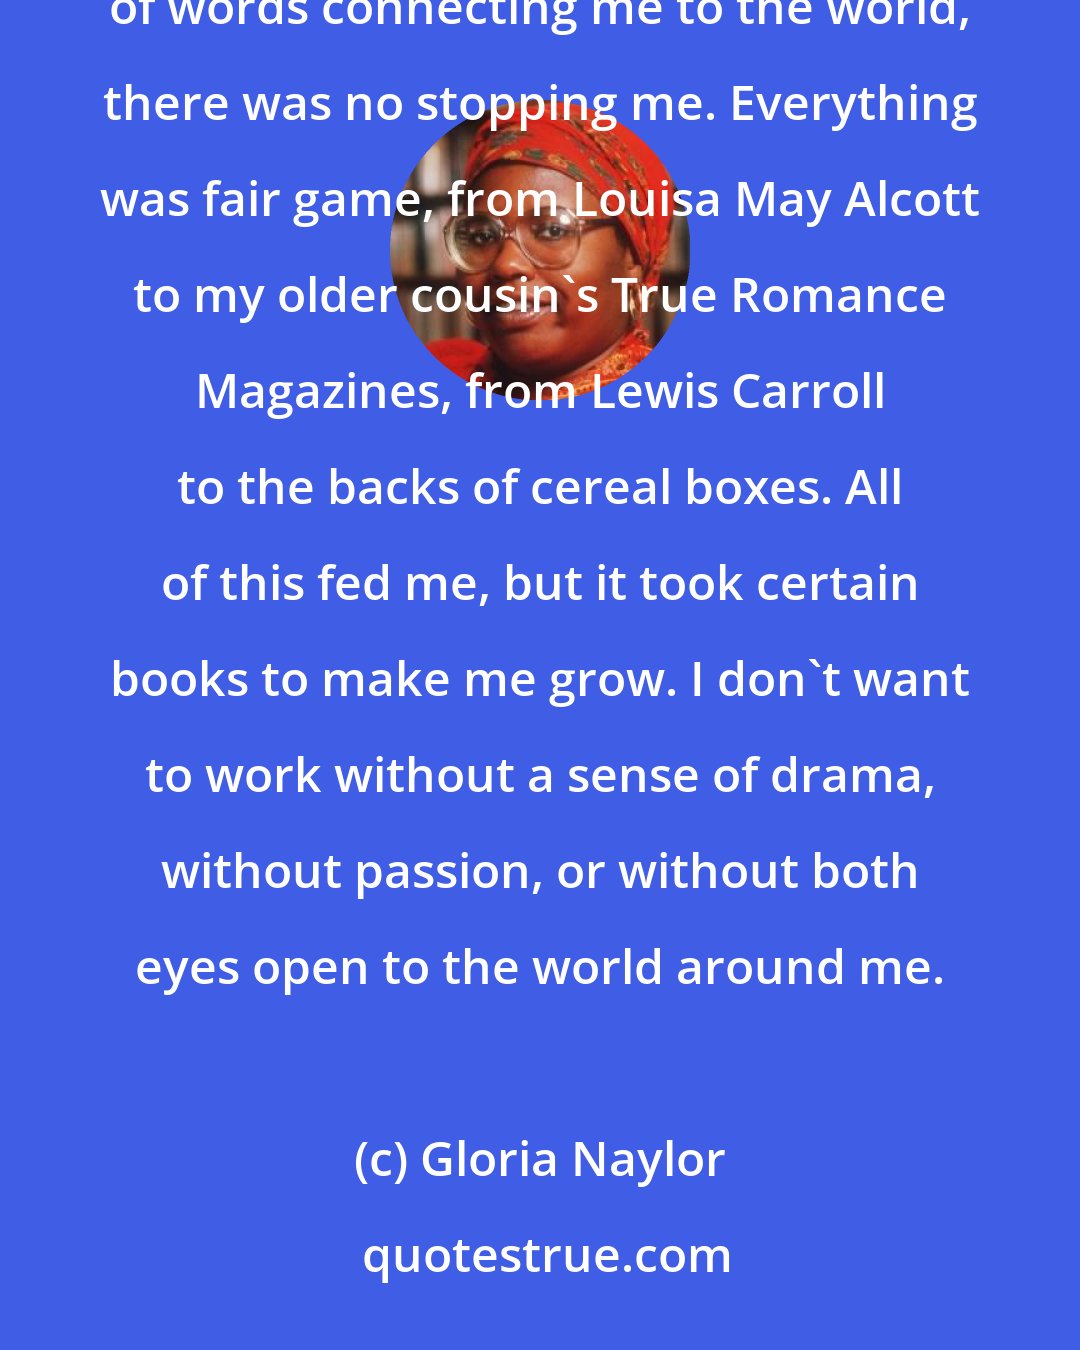 Gloria Naylor: Writers are voracious readers. Once I unlocked the mystery of the alphabet that led to words, a multitude of words connecting me to the world, there was no stopping me. Everything was fair game, from Louisa May Alcott to my older cousin's True Romance Magazines, from Lewis Carroll to the backs of cereal boxes. All of this fed me, but it took certain books to make me grow. I don't want to work without a sense of drama, without passion, or without both eyes open to the world around me.